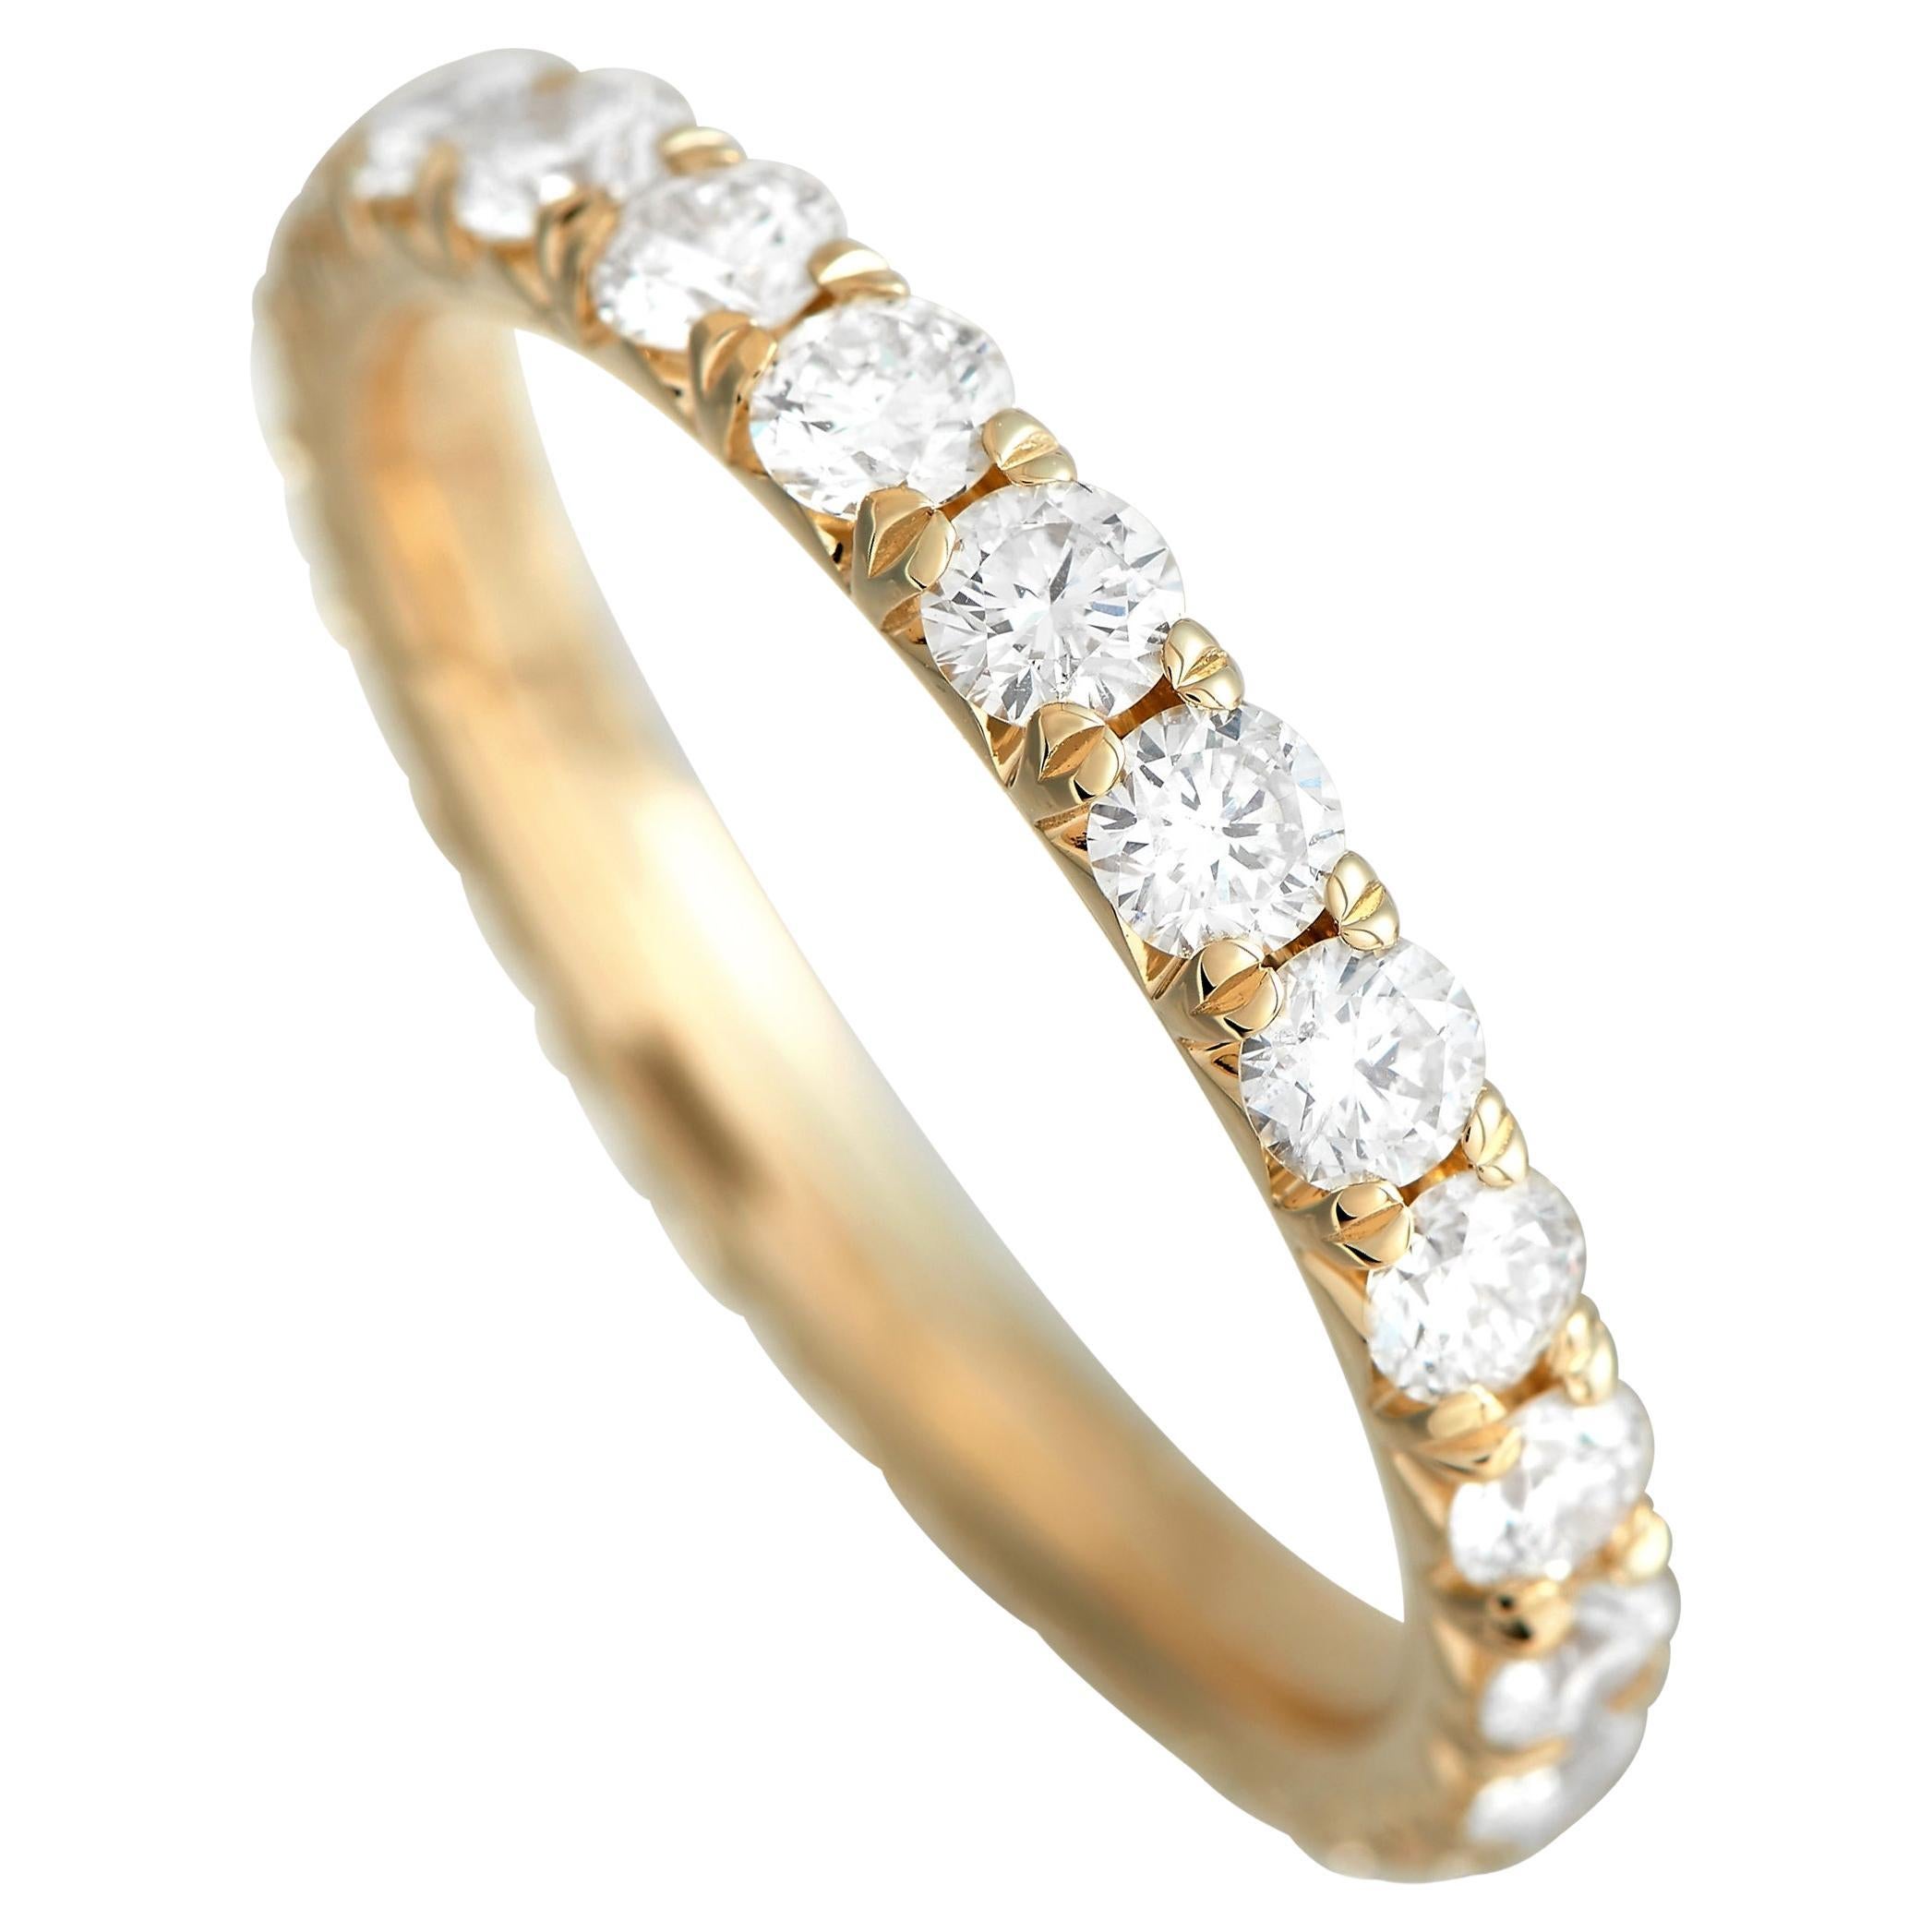 LB Exclusive 18K Yellow Gold 1.75 Ct Diamond Eternity Band Ring